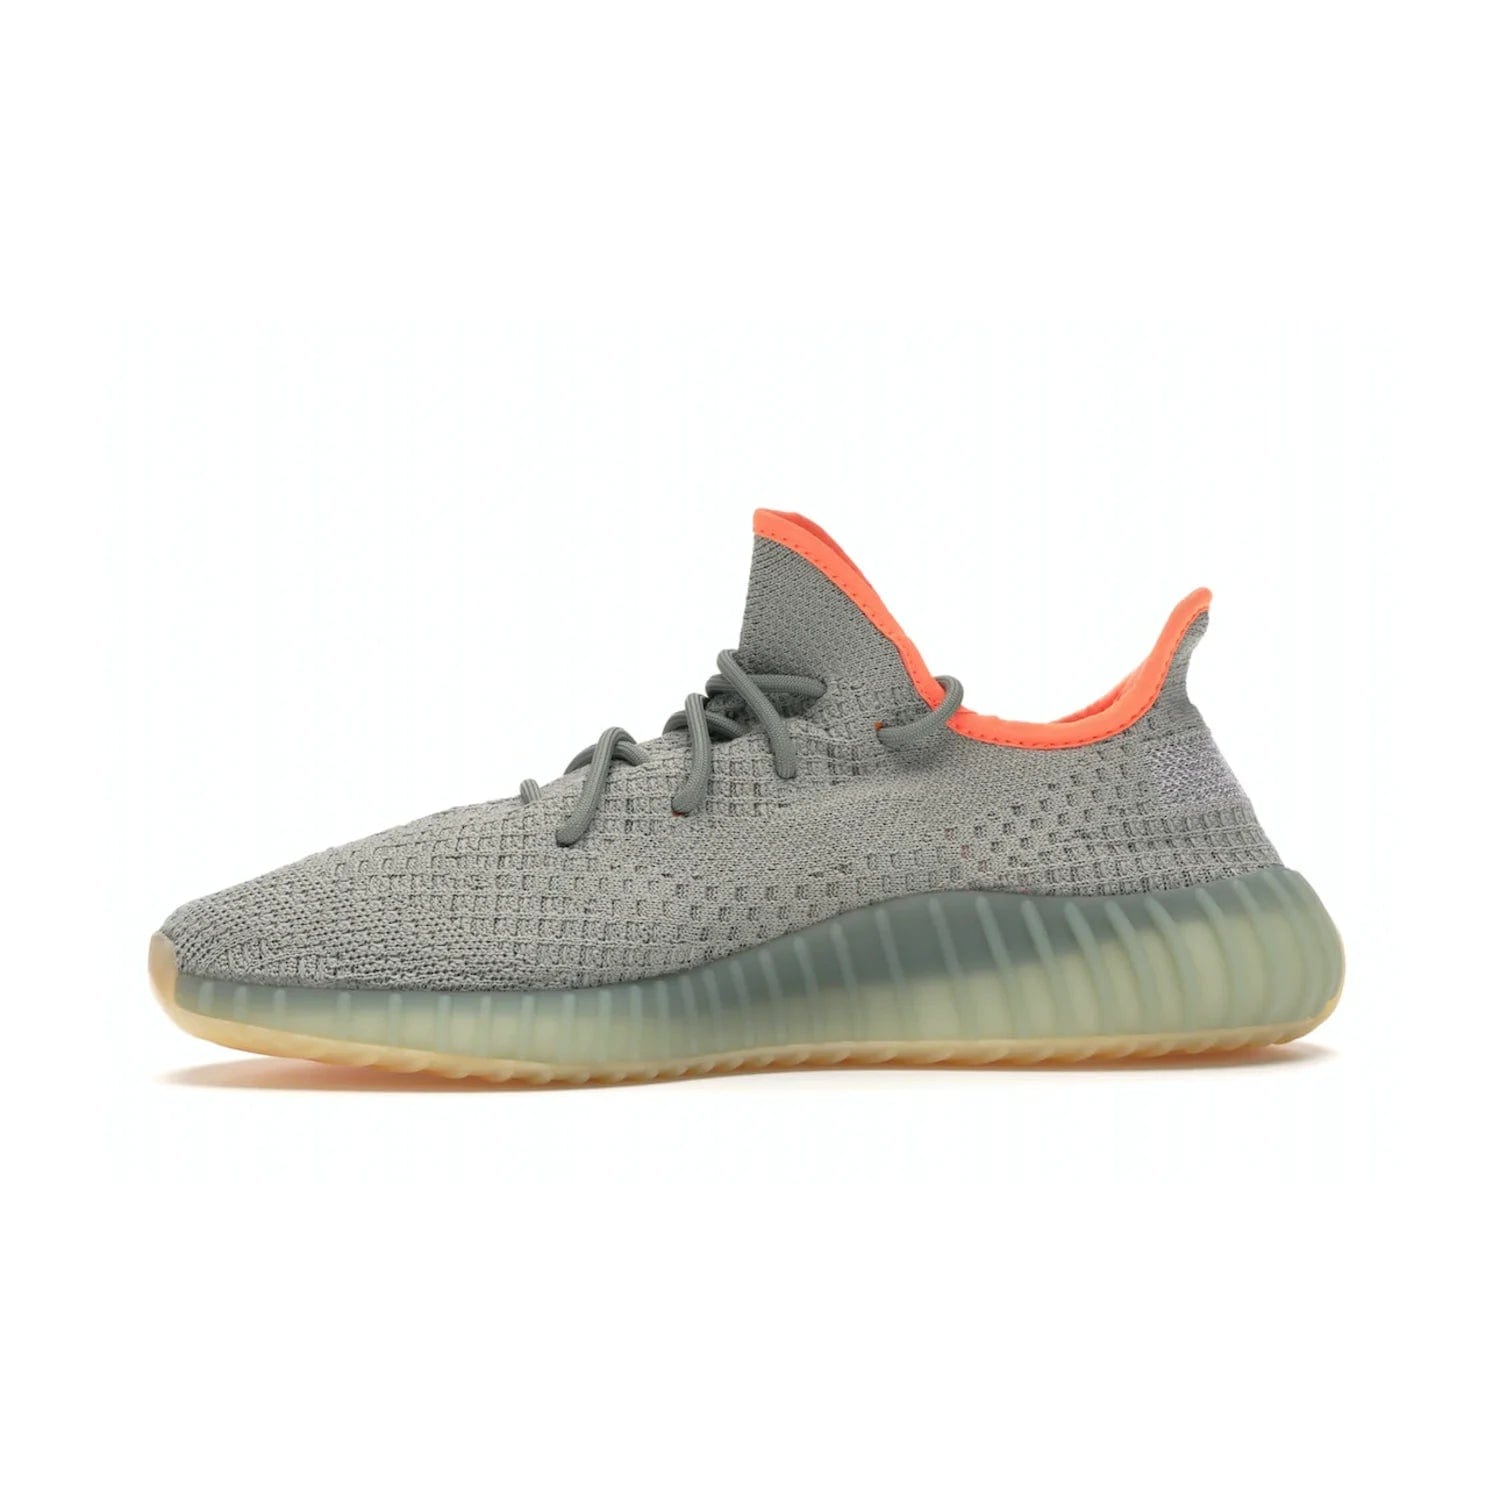 adidas Yeezy Boost 350 V2 Desert Sage - Image 18 - Only at www.BallersClubKickz.com - Upgrade your style with the adidas Yeezy Boost 350 V2 Desert Sage. This 350V2 features a Desert Sage primeknit upper with tonal side stripe, and an orange-highlighted translucent Boost cushioning sole. Stay on-trend in effortless style.